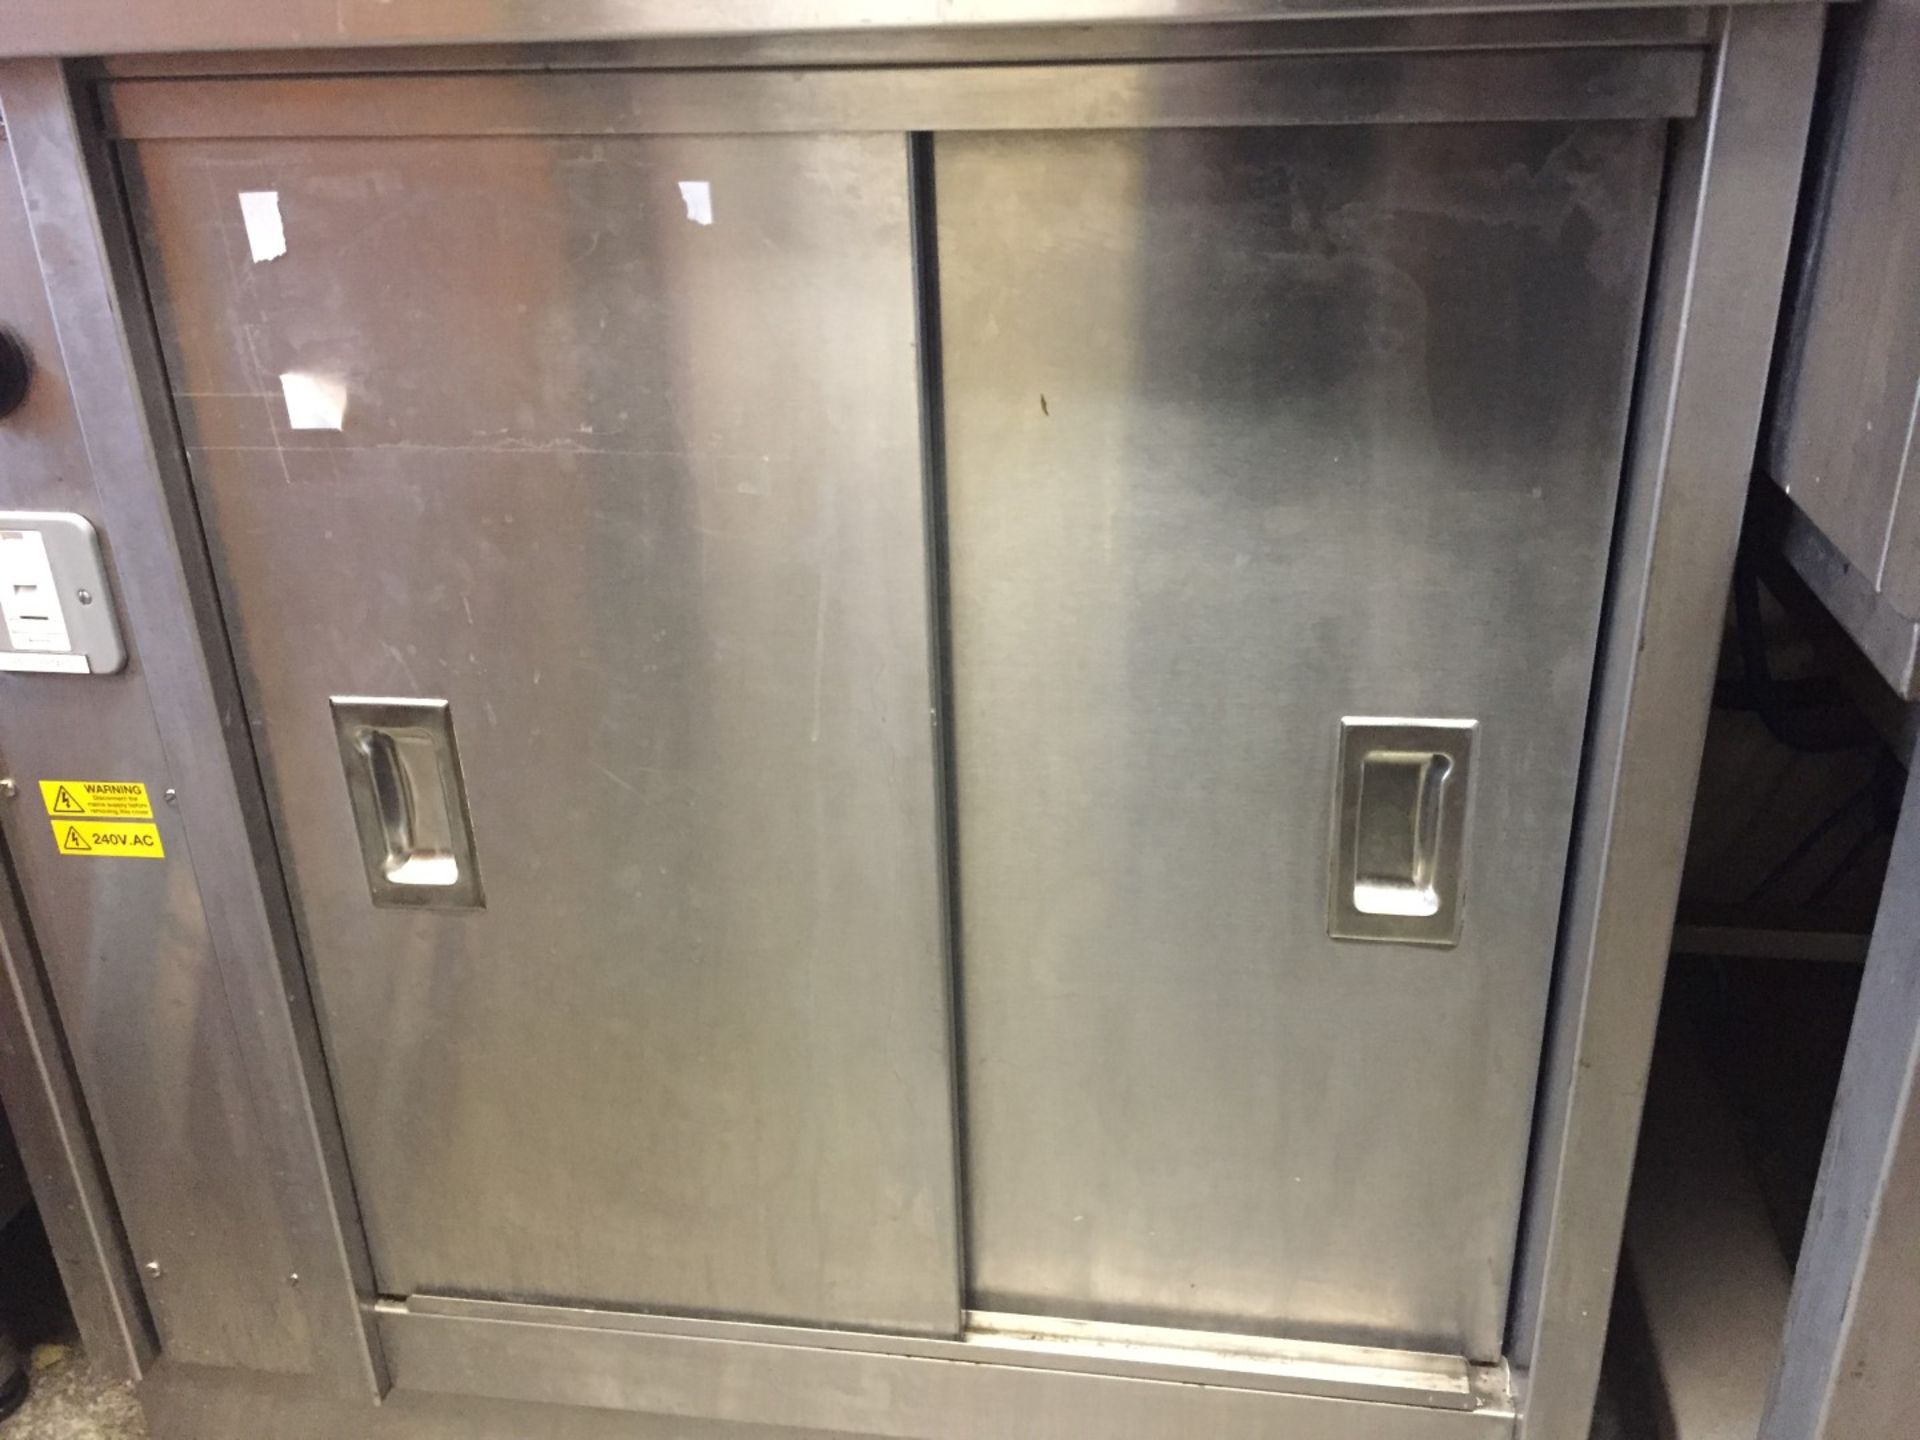 1 x Stainless Steel Commercial Hot Cupboard - Dimensions: W90 x D55 x H90cm - CL191 - Location: - Image 3 of 5